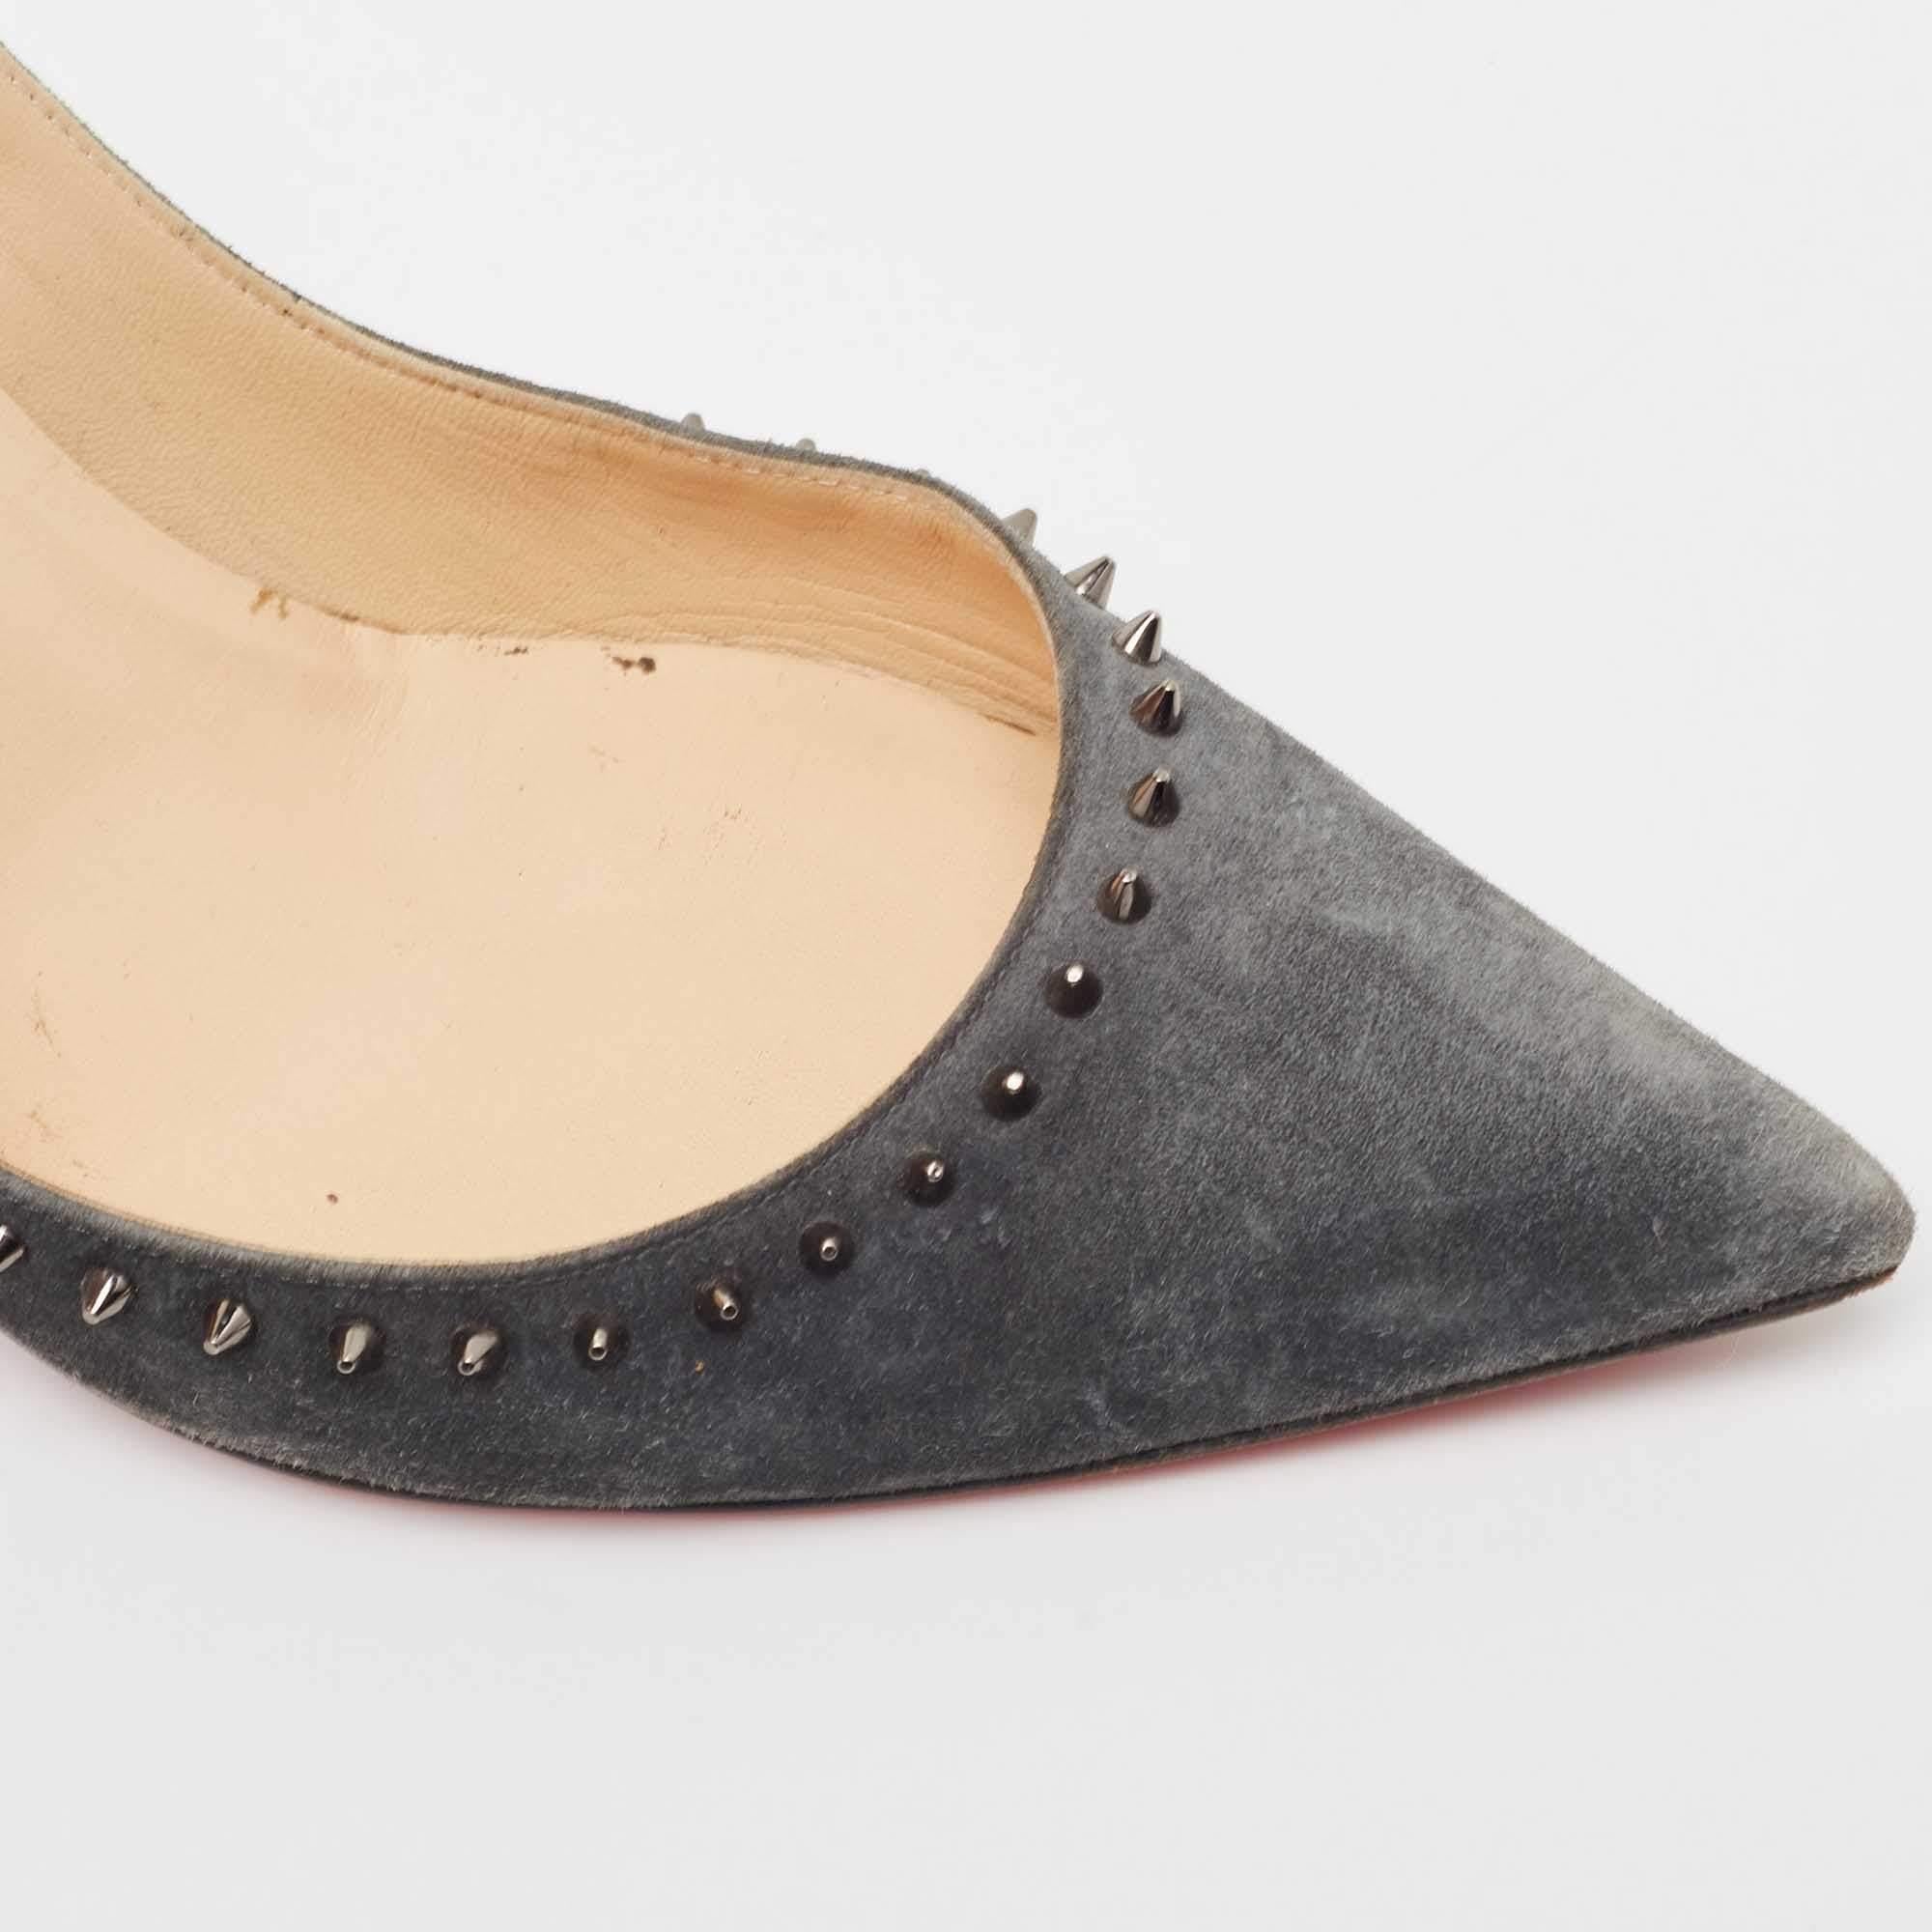 Christian Louboutin Grey Suede Anjalina Spike Pointed Toe Pumps Size 38.5 2